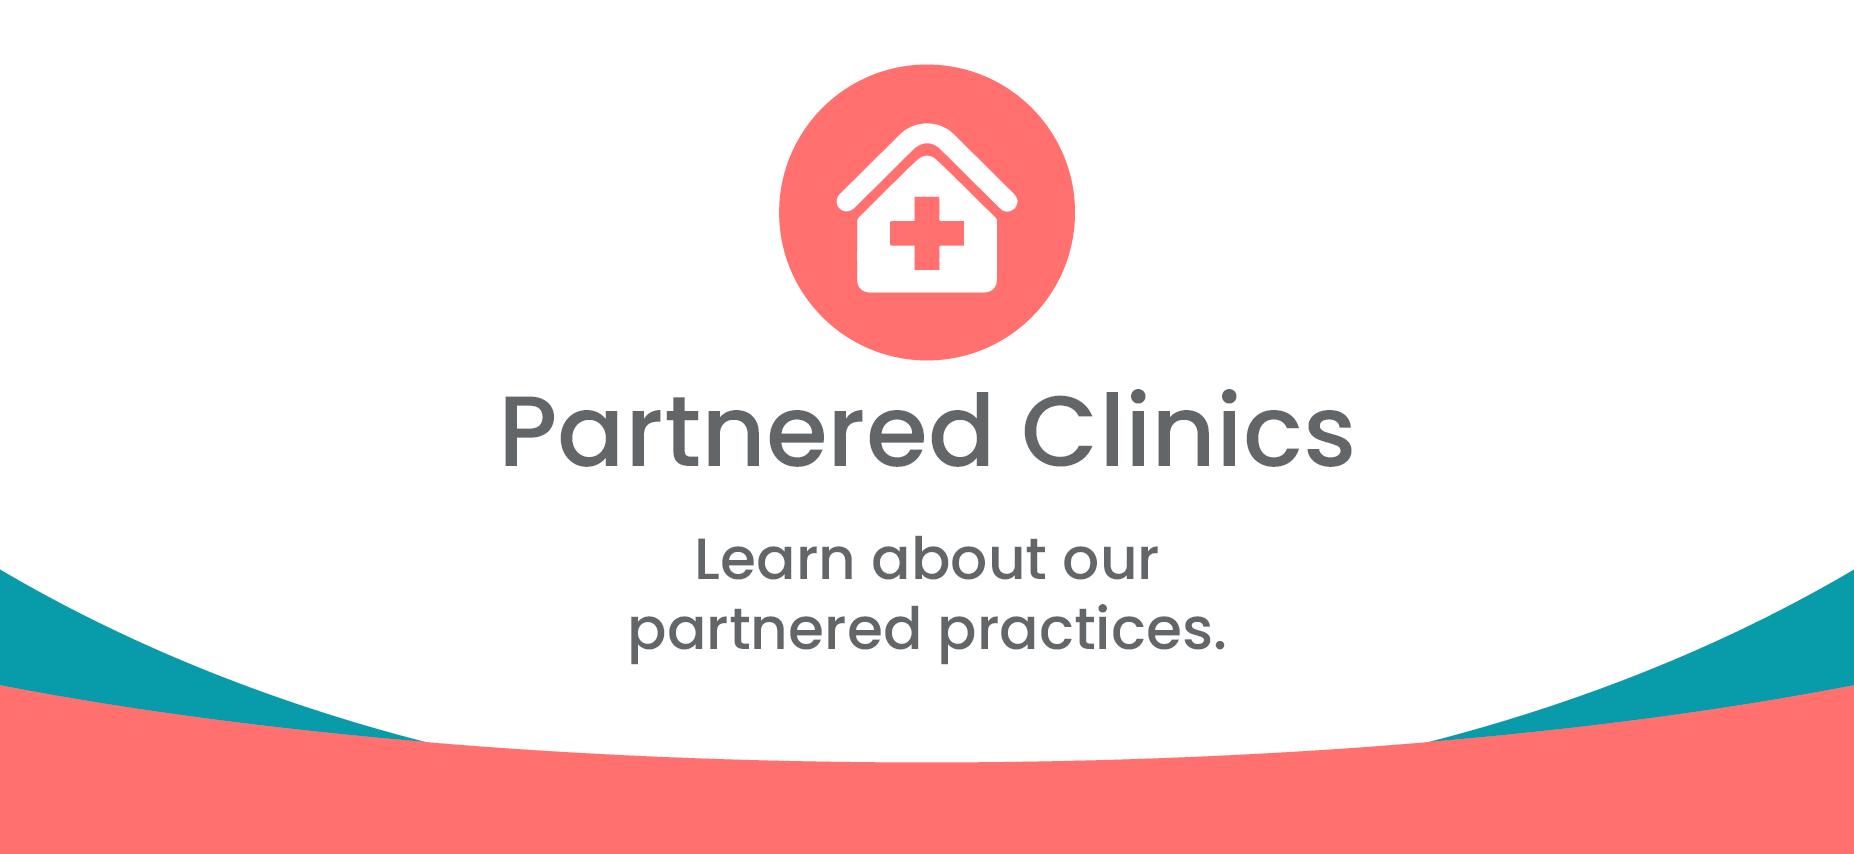 Primary Care Medical Partners